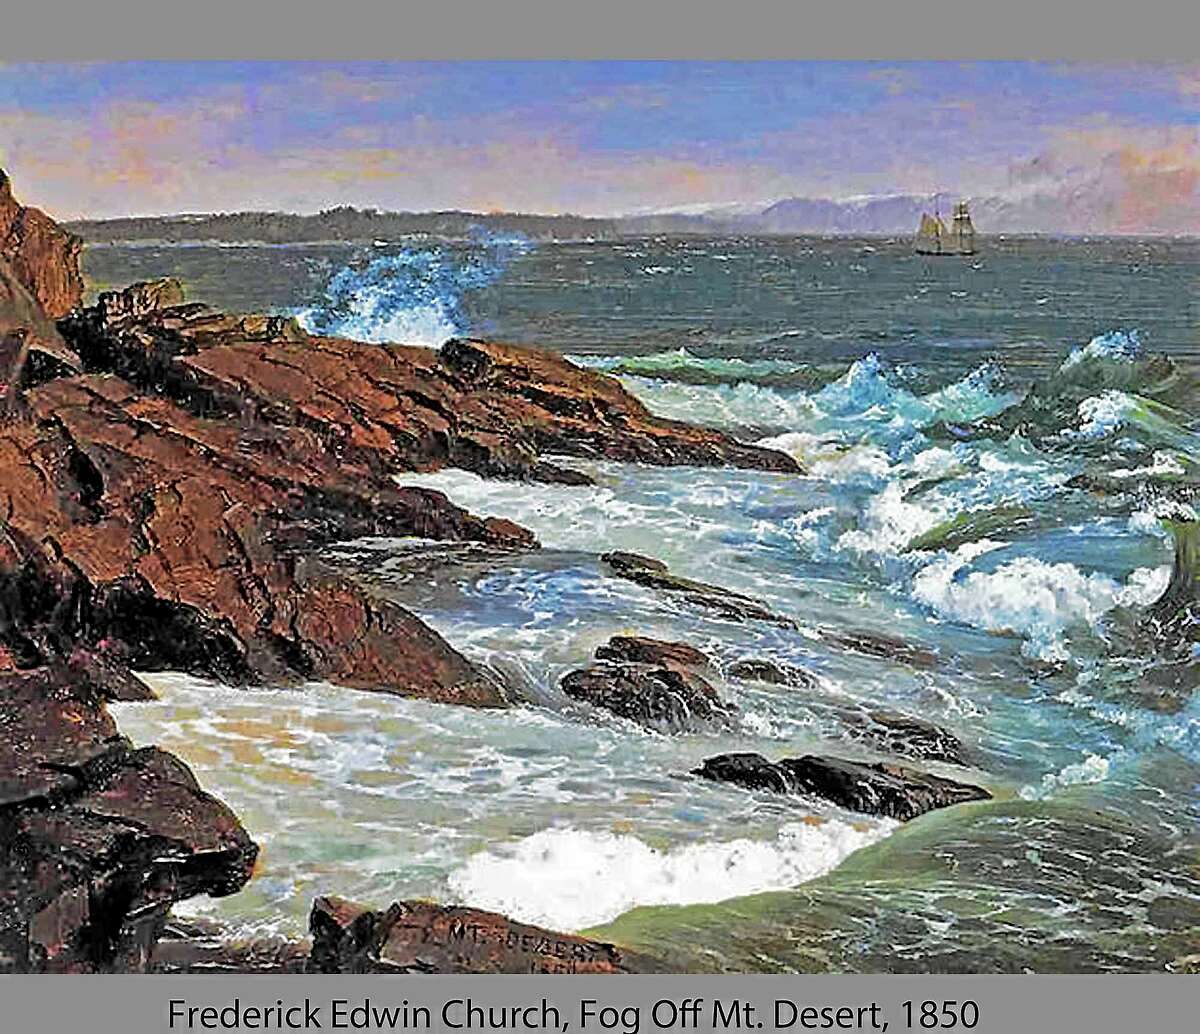 MADISON LECTURE: Educator Fred Biamonte of the New Britain Museum of American Art will present a lecture Wednesday focusing on paintings of the East Coast from the middle of the 19th century through the beginning of the 20th century, including “Fog Off Mt. Desert Island” by Frederic Edwin Church, from 1850. The Madison Art Society lecture will take place at 6:30 p.m. at Scranton Memorial Library, 801 Boston Post Road, Madison. The event coincides with the 40th annual members exhibit and sale.